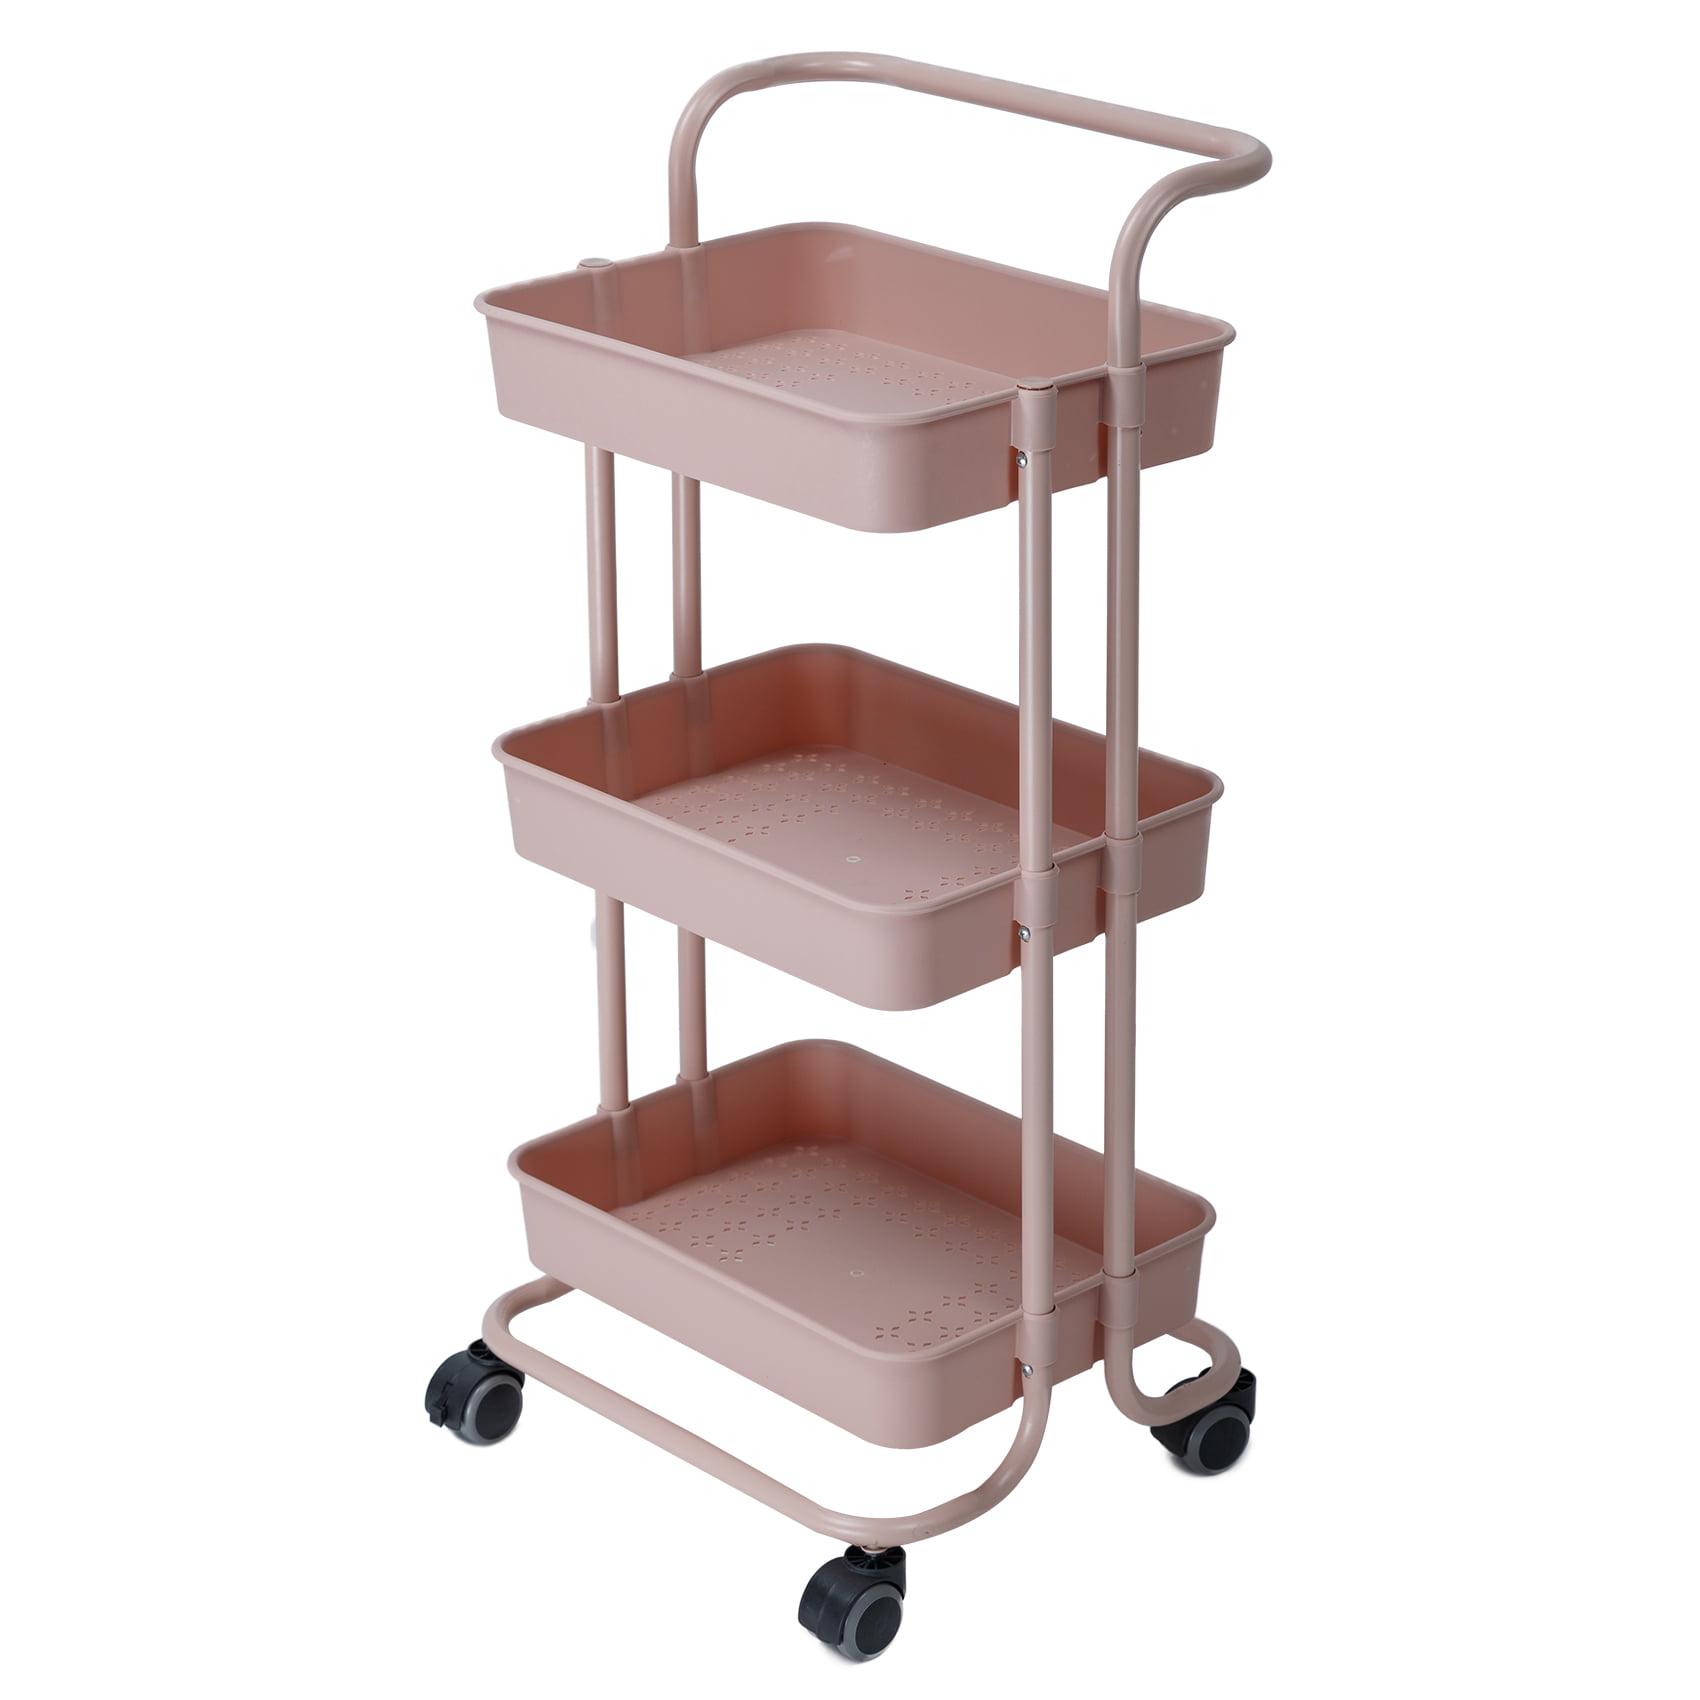 Rolling Utility Storage Rack Organizer for Kitchen Bedroom Garage Home Organiser Office Living Room ZYL-YL 3-Tier Kitchen Trolley Cart with Lockable Caster Wheels Color : Wood, Size : 80x48x33 